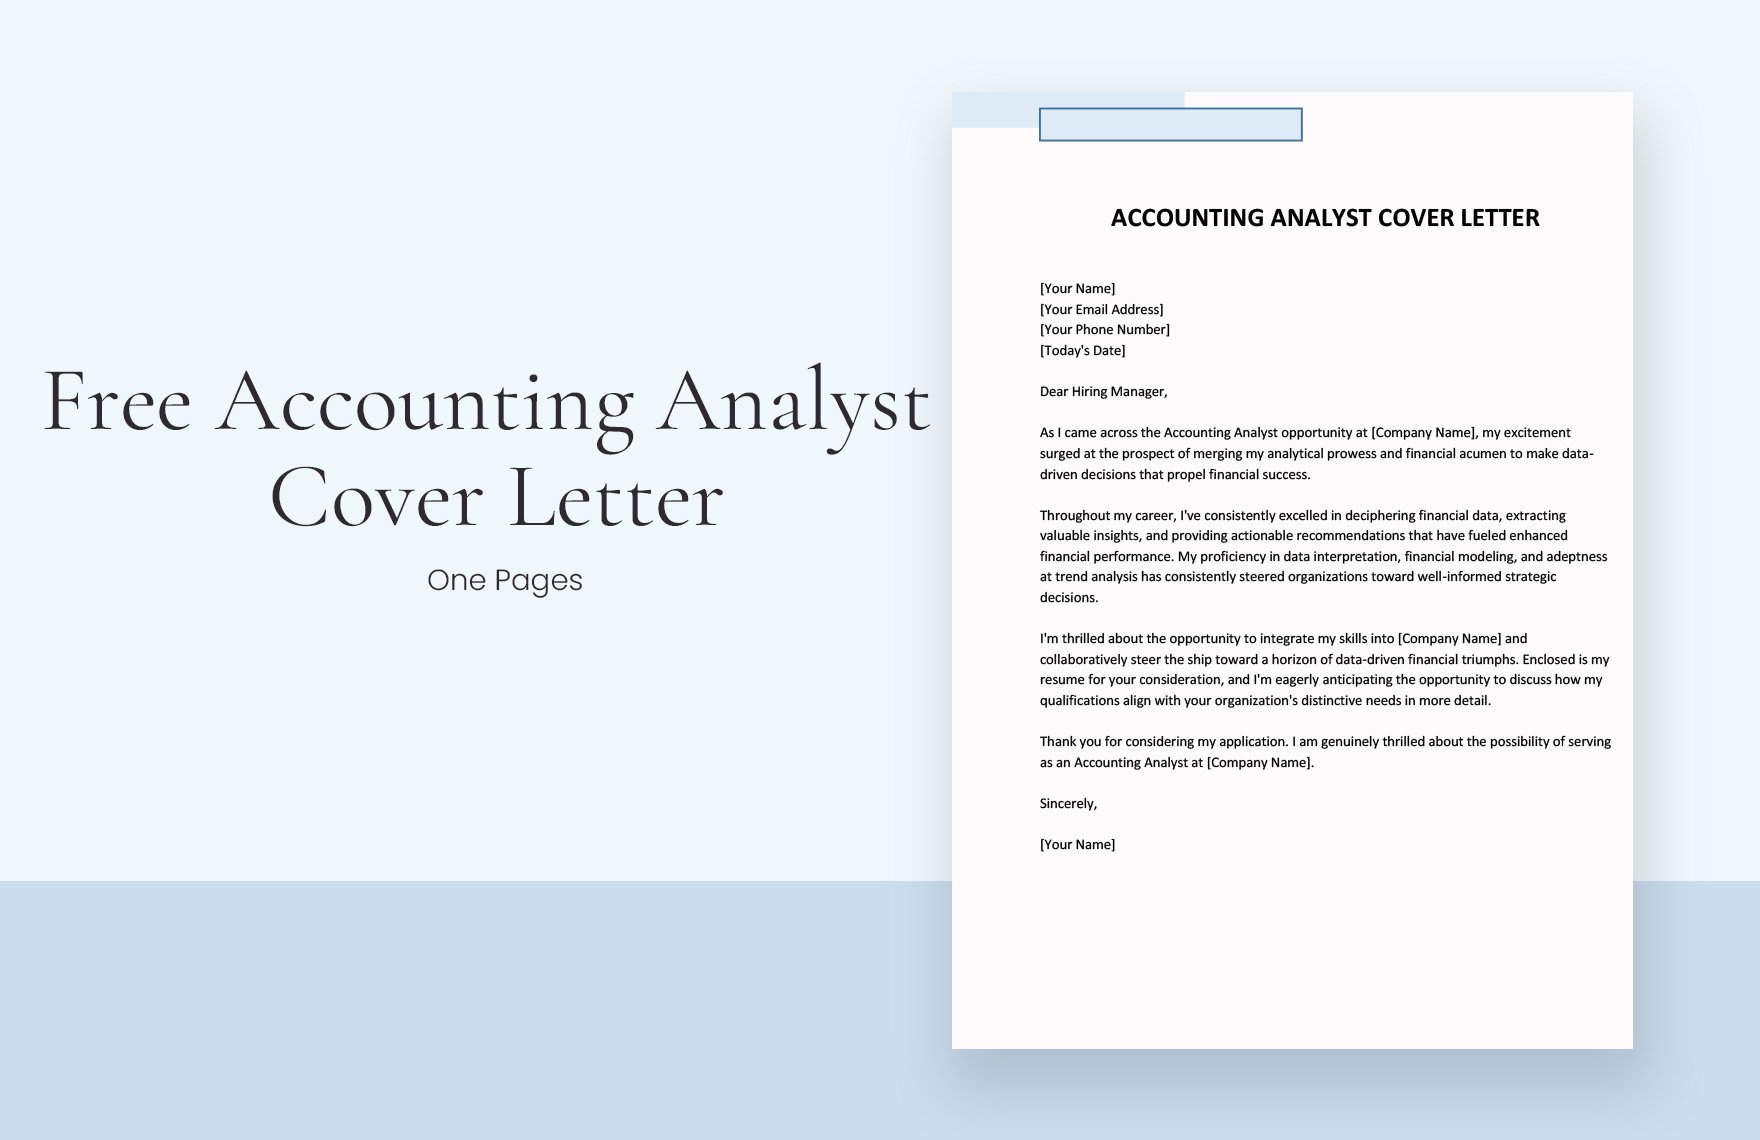 Accounting Analyst Cover Letter in Word, Google Docs